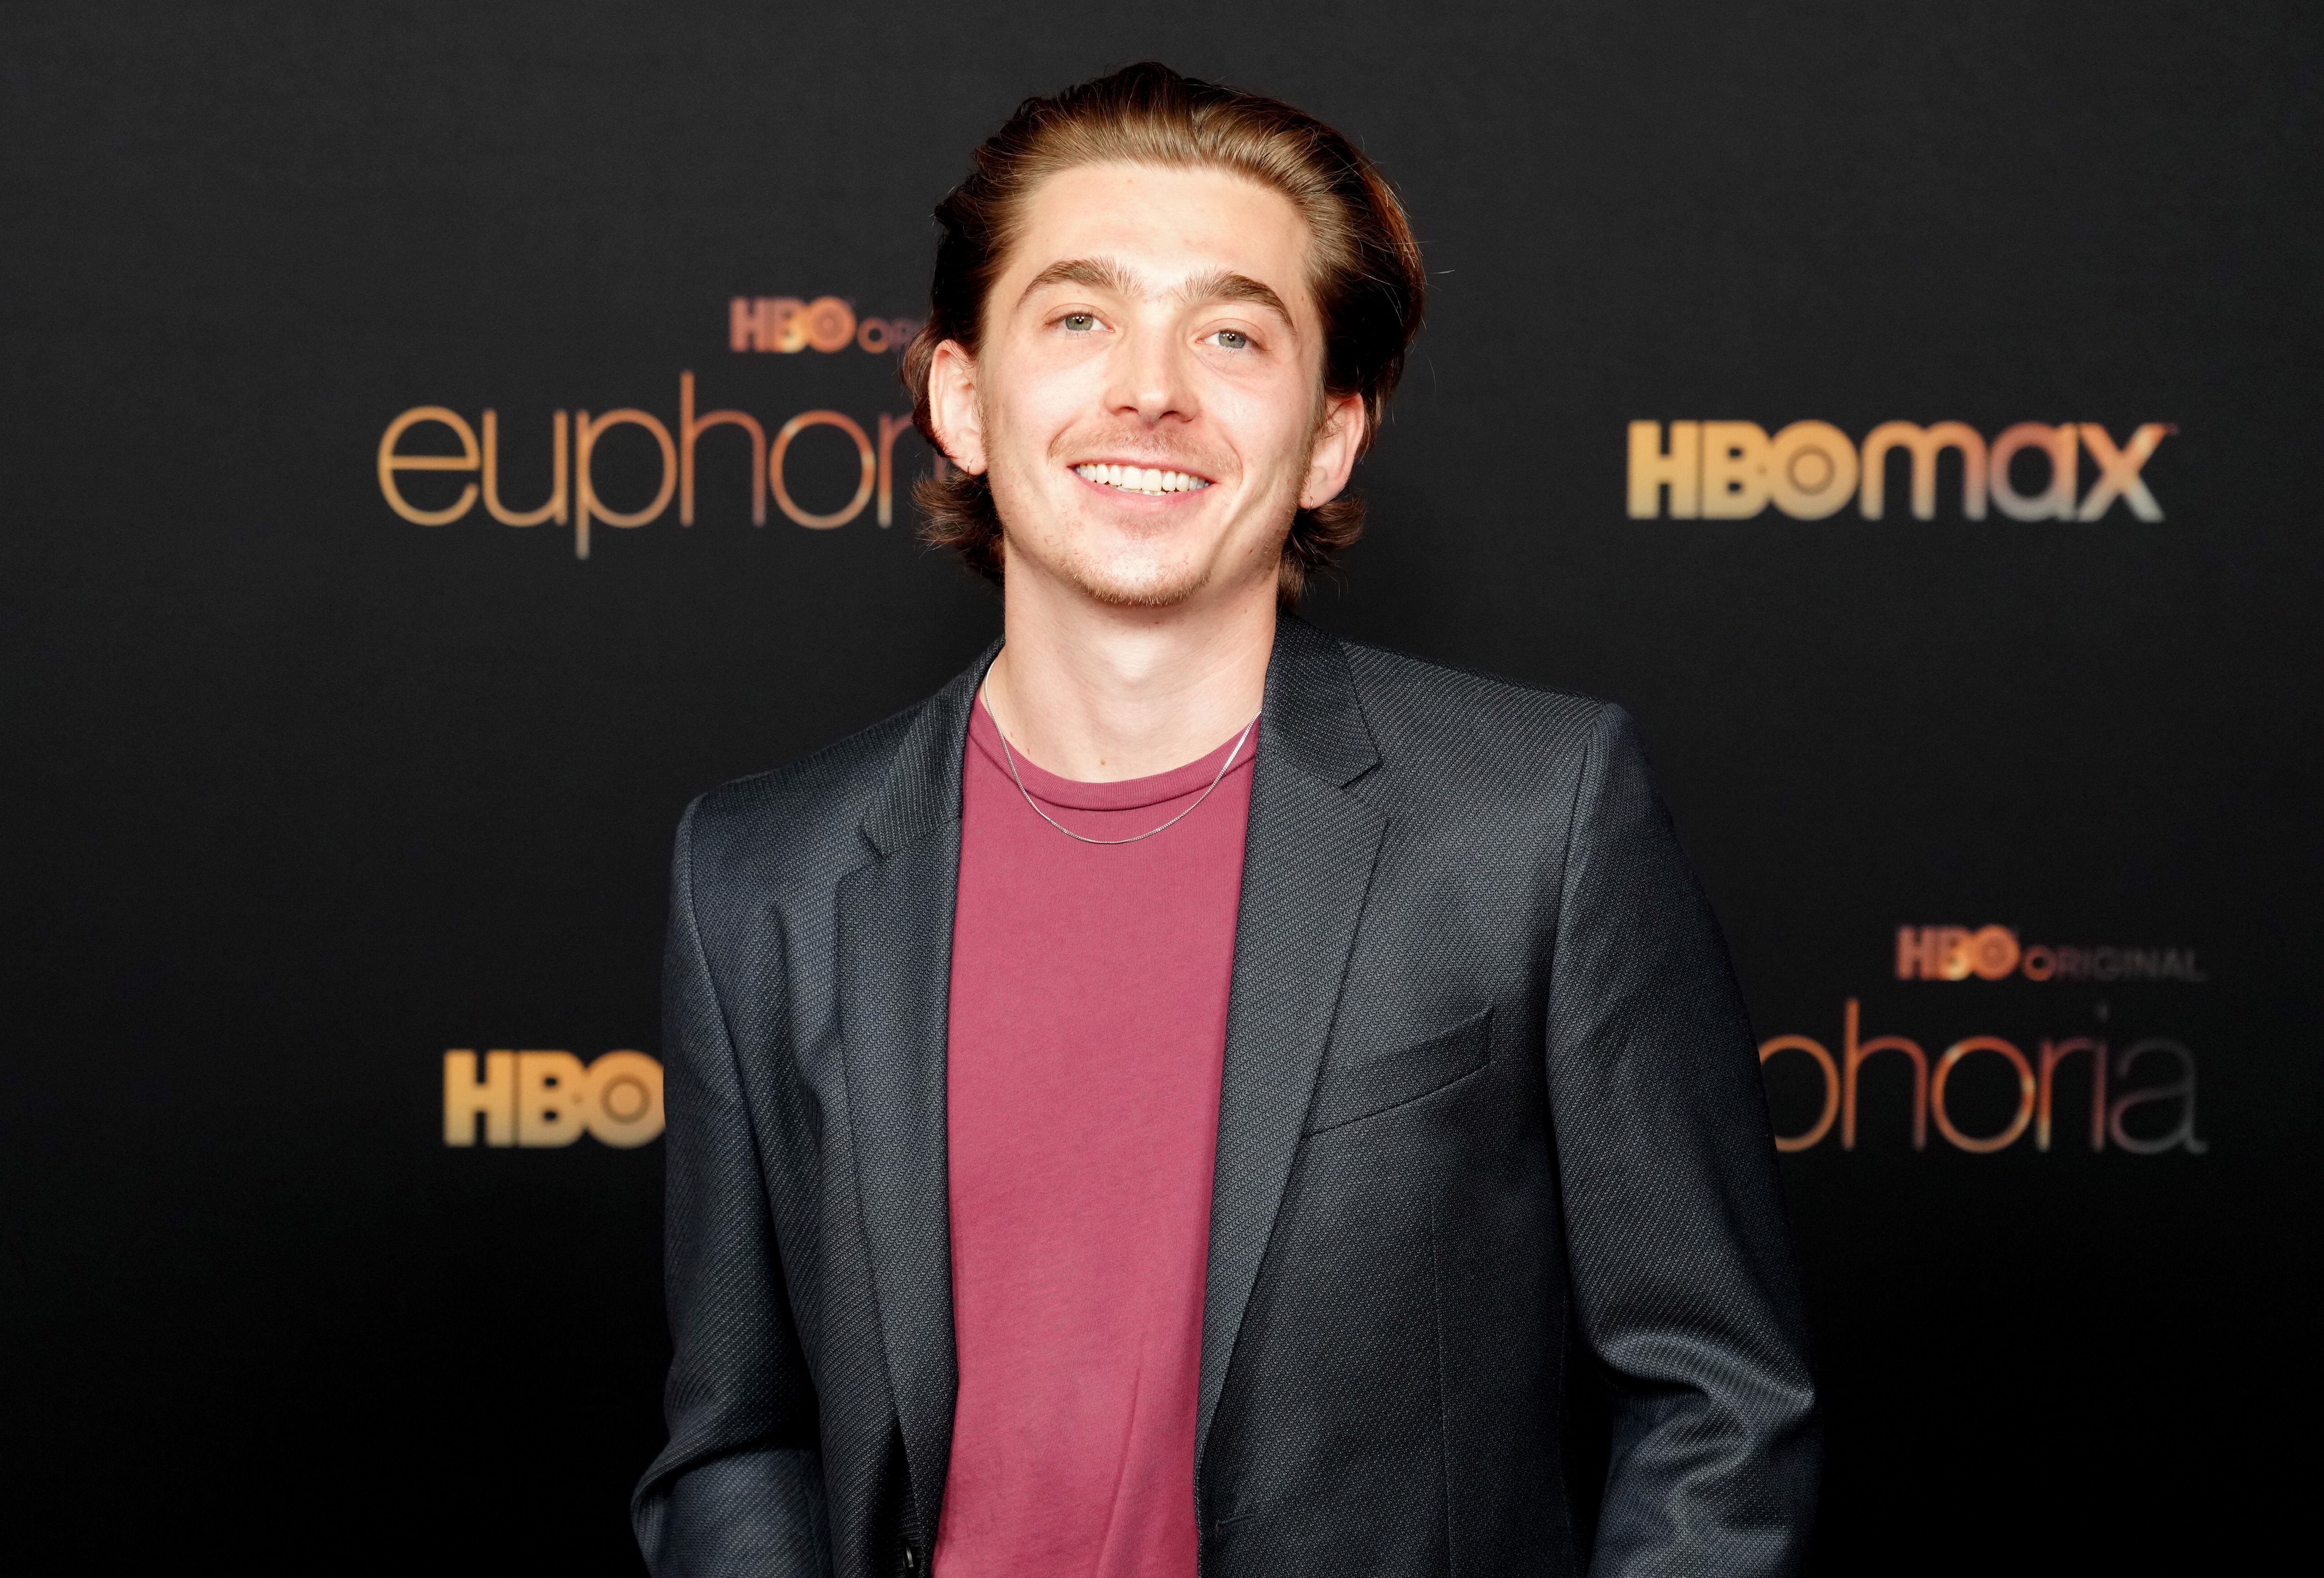 Austin Abrams at HBO's "Euphoria" Season 2 Photo Call at Goya Studios on January 05, 2022 in Los Angeles, California. | Source: Getty Images